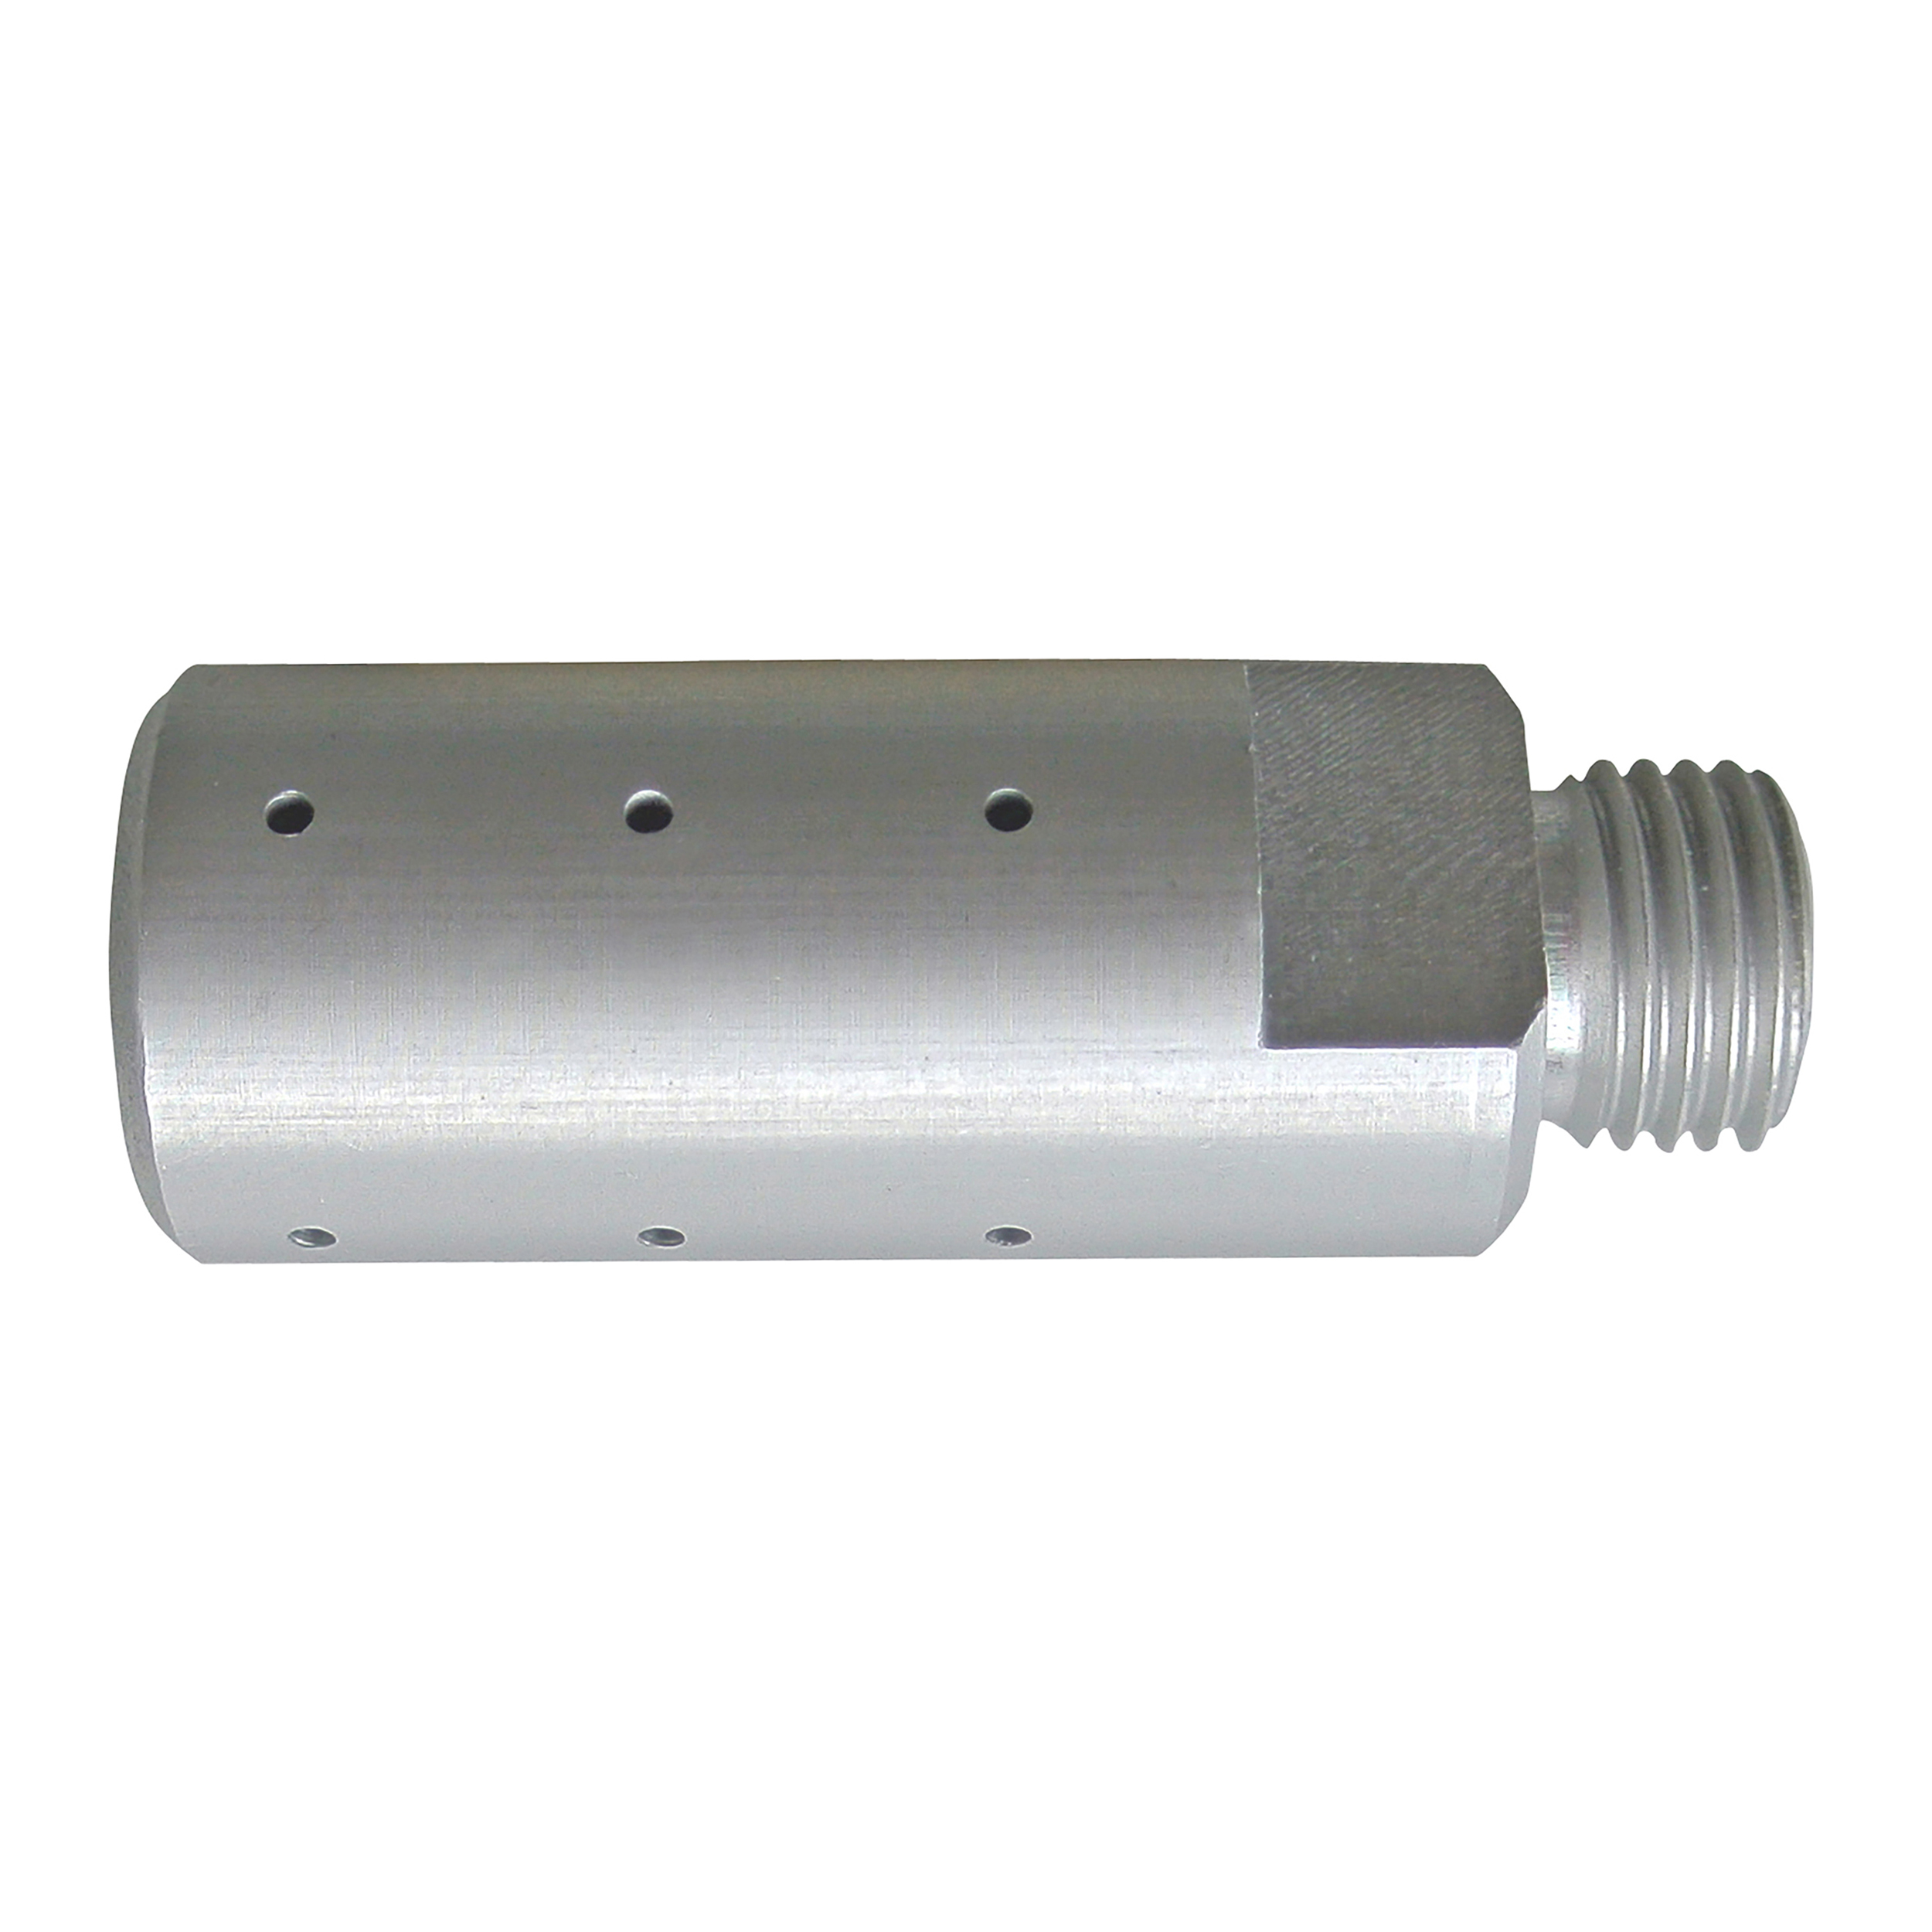 High flow 90°-nozzle, 3 × 4 lateral holes, hole-Ø1.4 mm, M12 × 1.25, aluminium, anodised